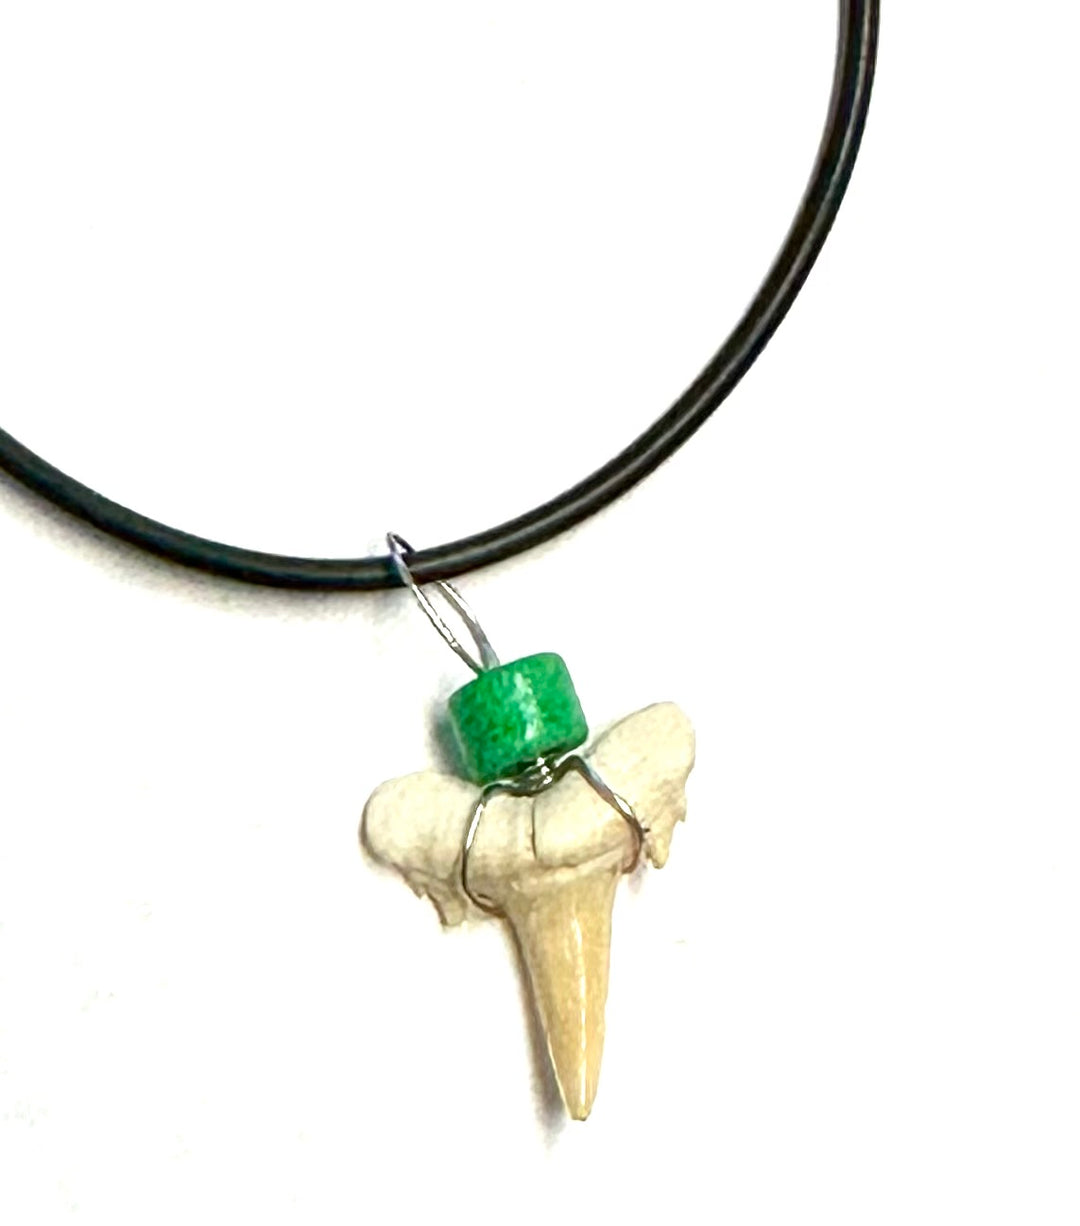 One Bead Sharktooth Necklace